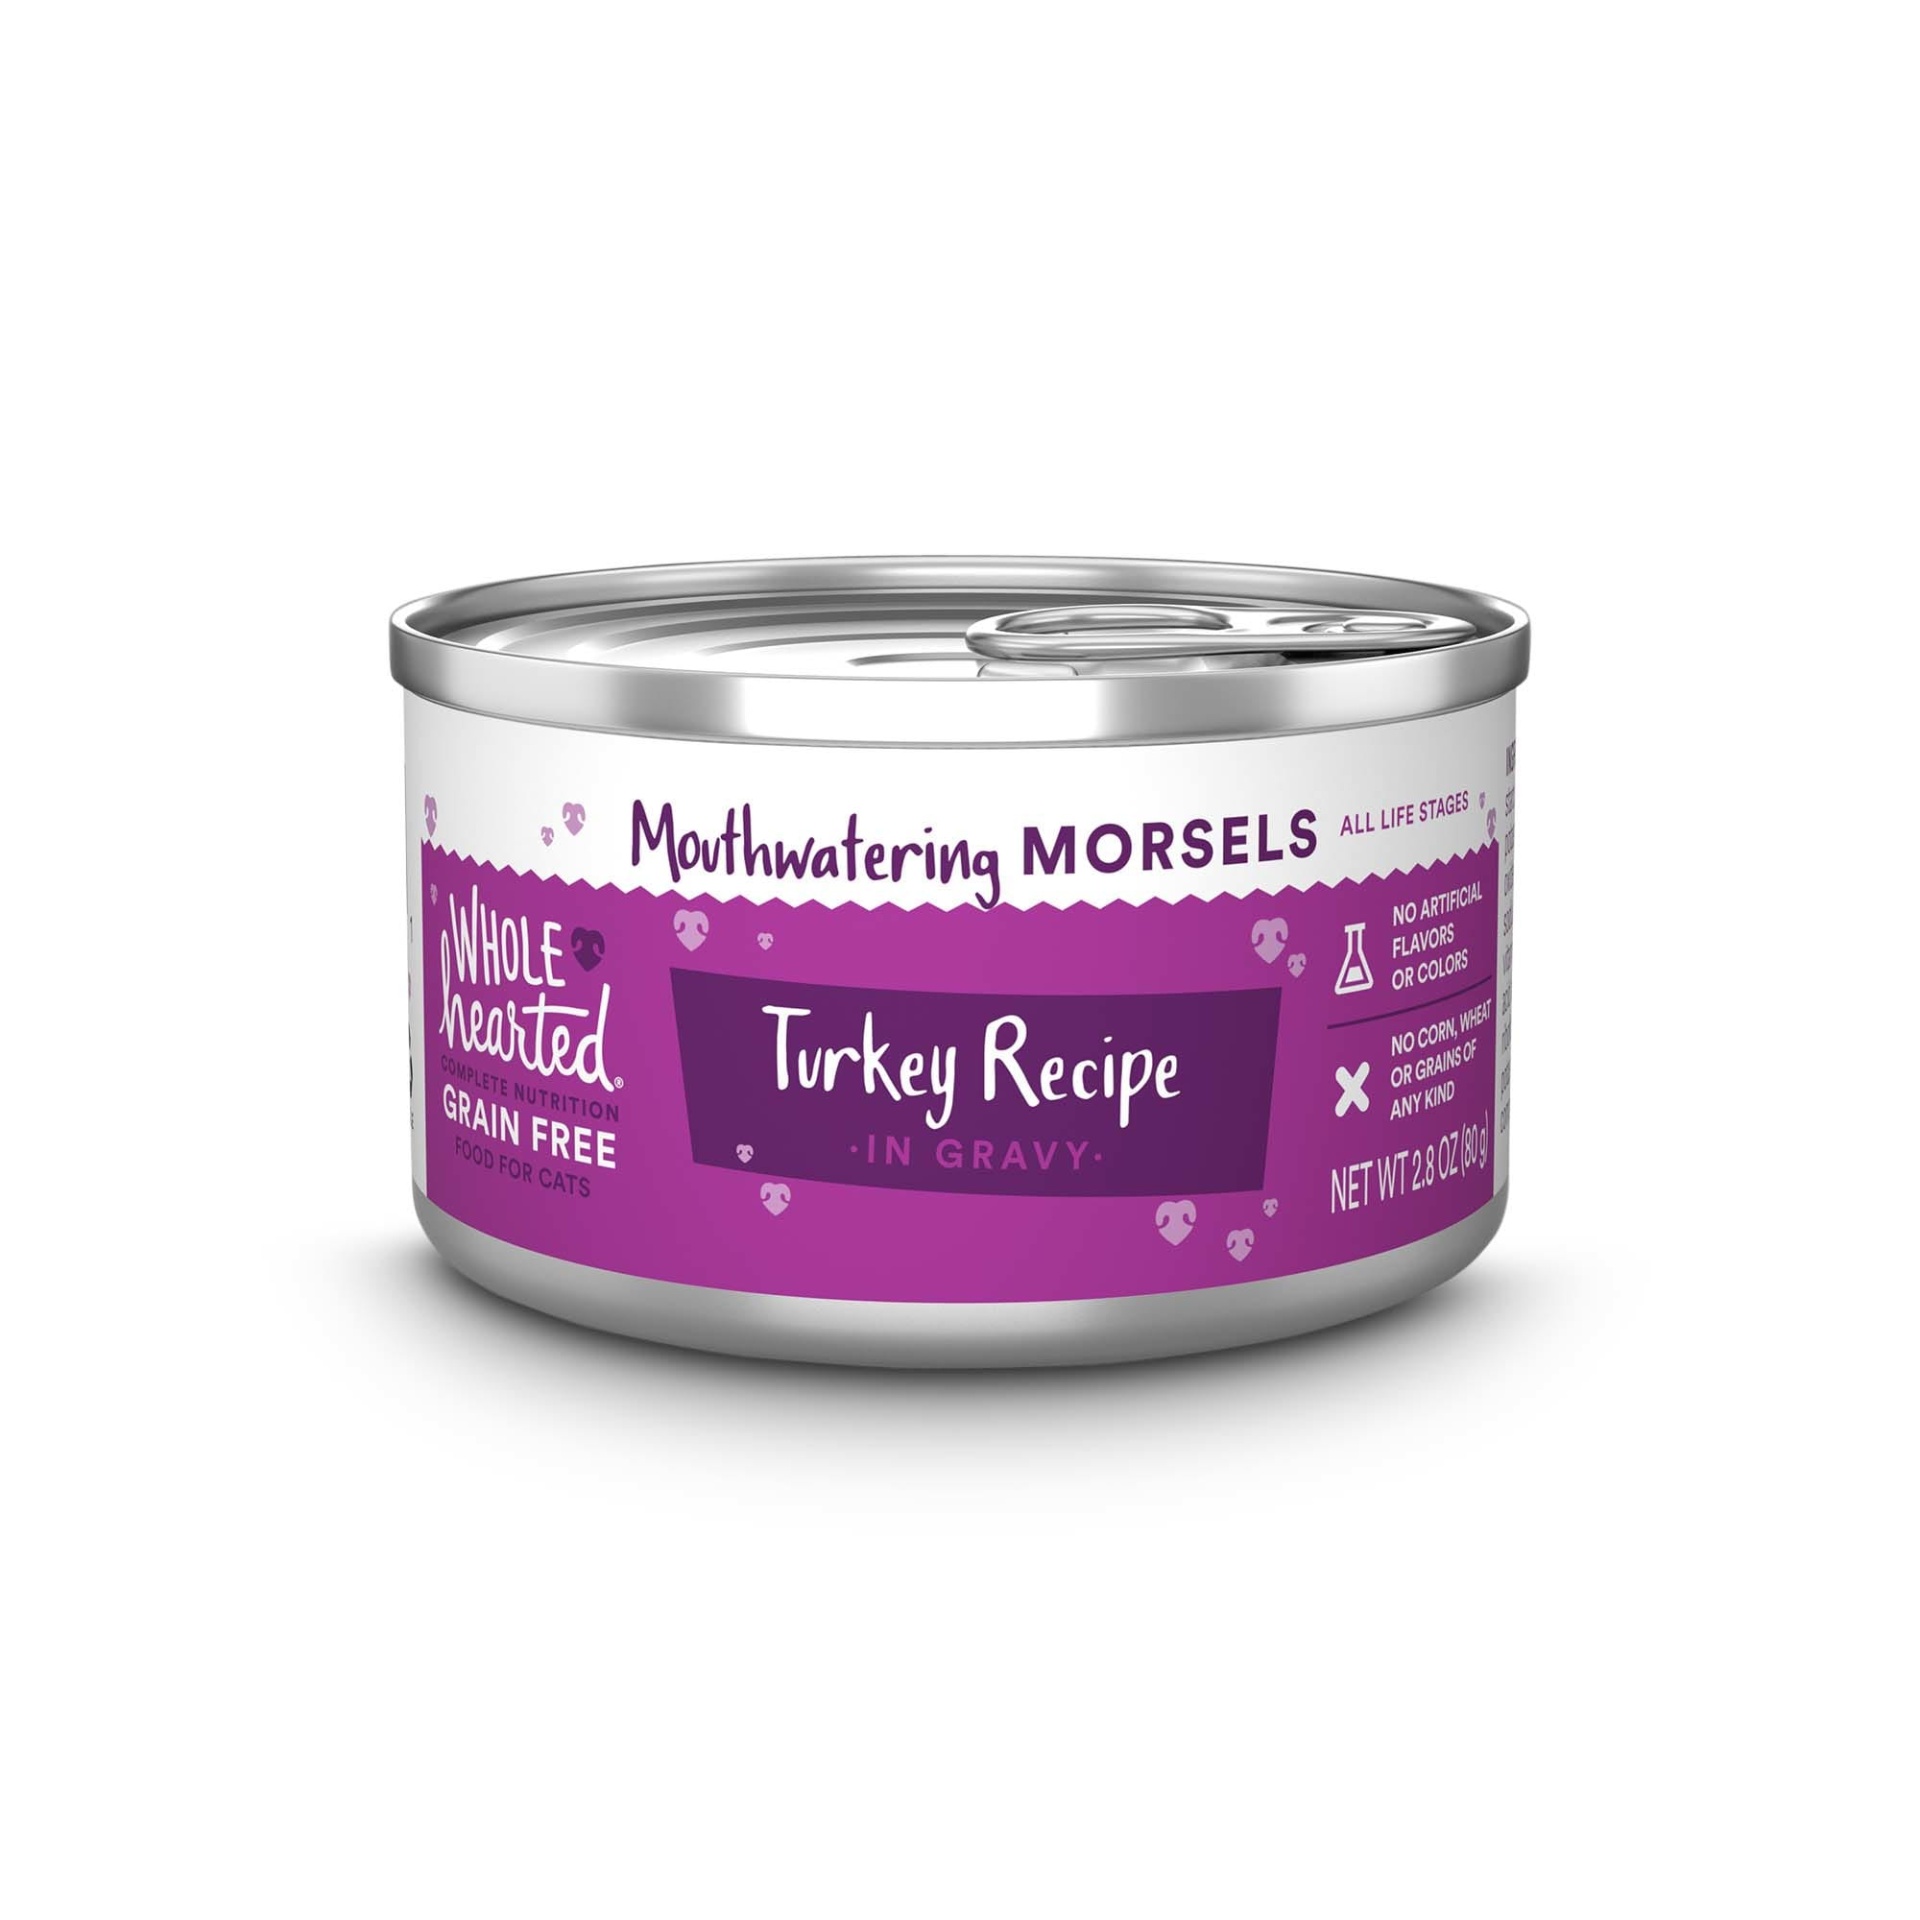 slide 1 of 1, Whd-Cat 2.8Z Turkey Morsel, 1 ct